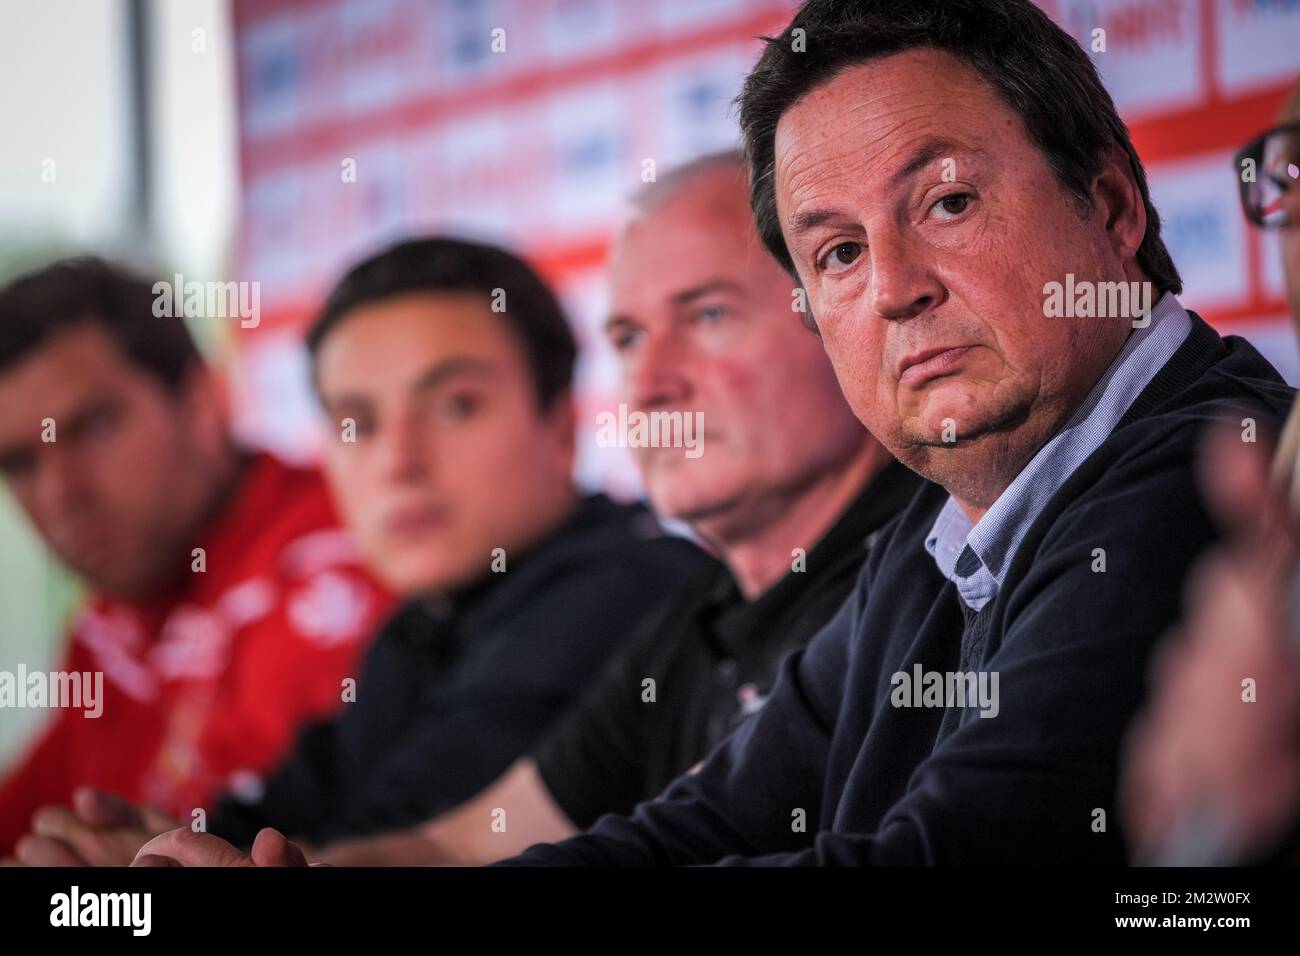 Belgian Hockey Federation Secretary-General Serge Pilet pictured during a press conference of the Belgian field hockey union on the European Championships, Wednesday 22 May 2019 in Antwerp. The Euros will be played in Antwerp next August. BELGA PHOTO LUC CLAESSEN Stock Photo